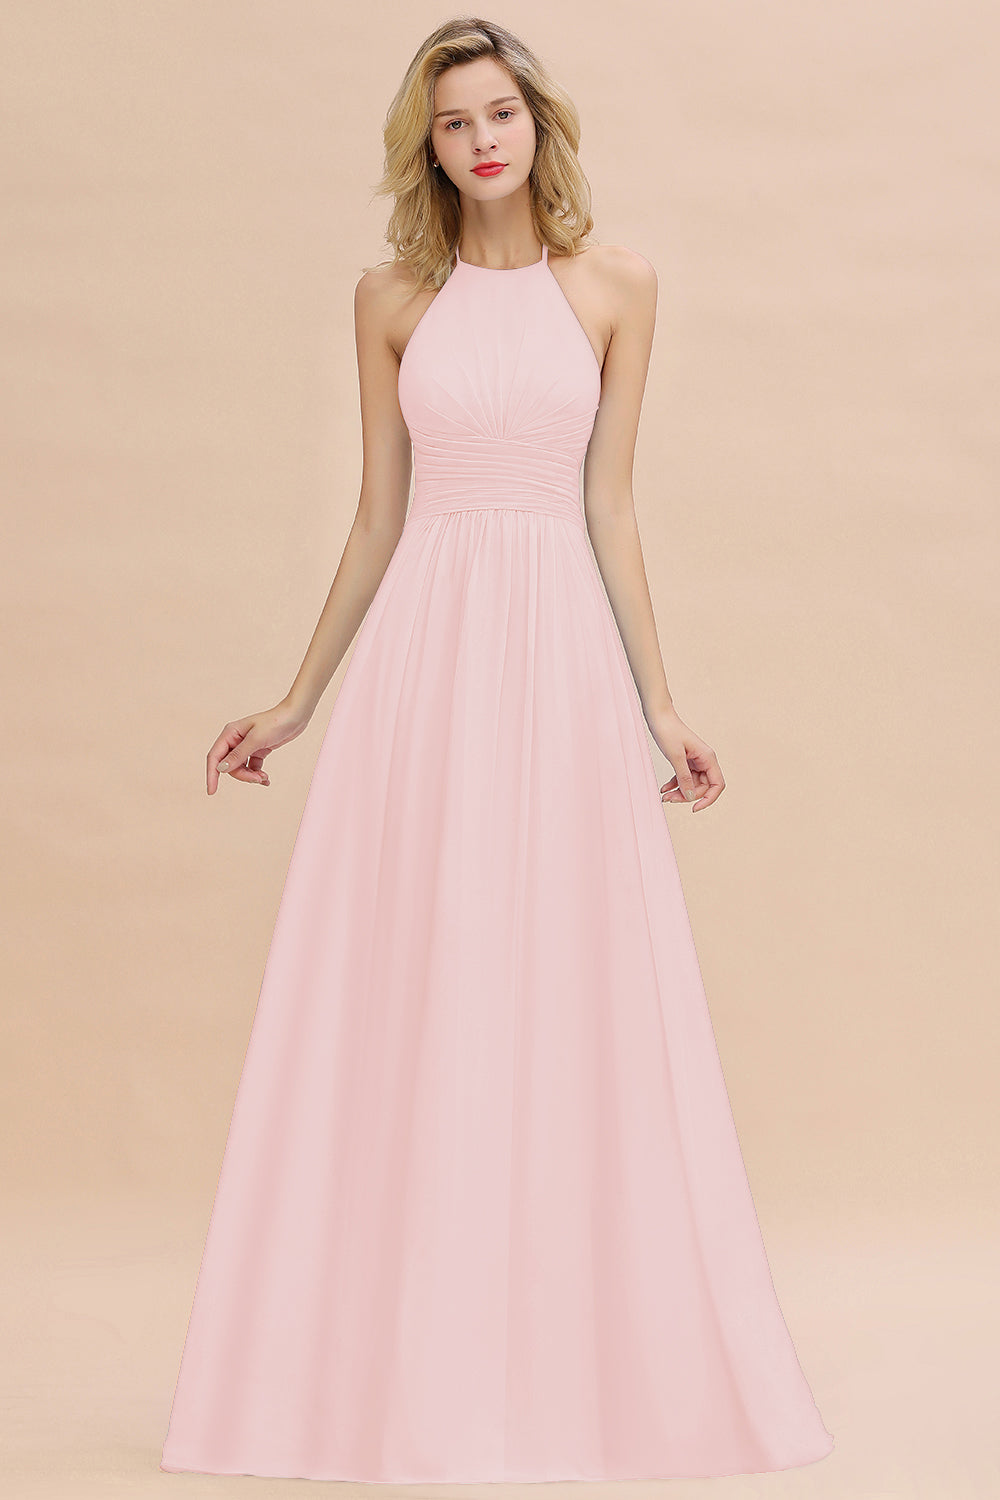 Glamorous Halter Backless Long Affordable Bridesmaid Dresses with Ruffle-27dress